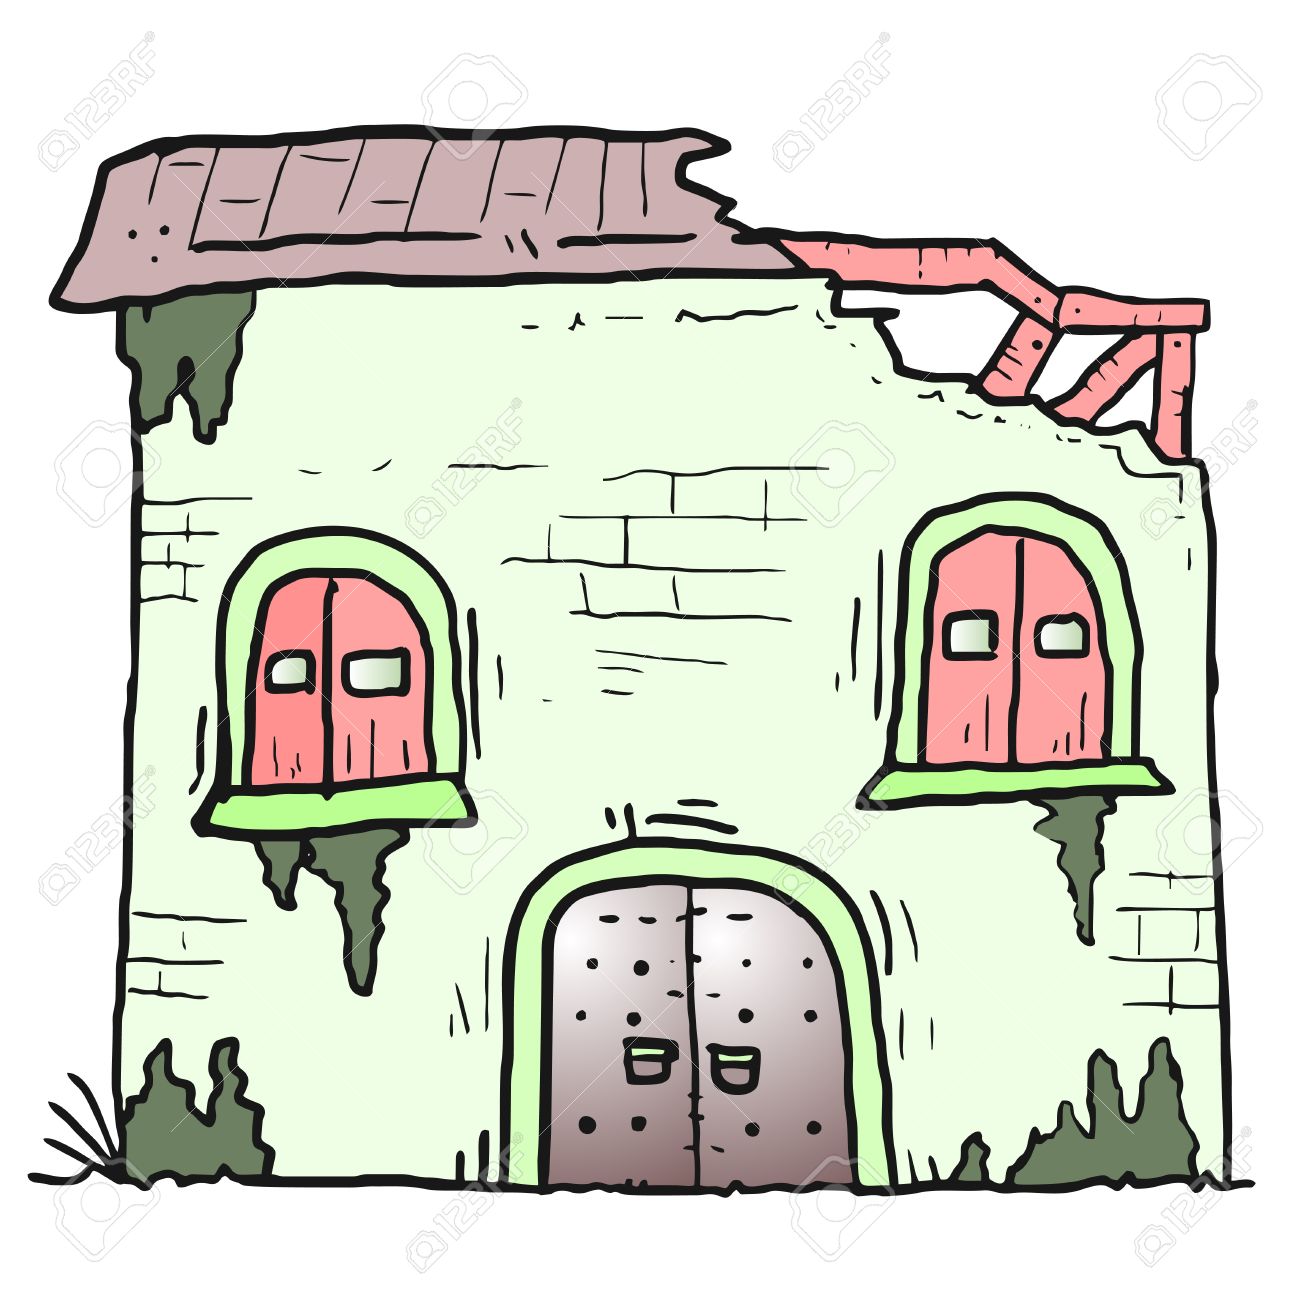 destroyed house clipart - photo #1